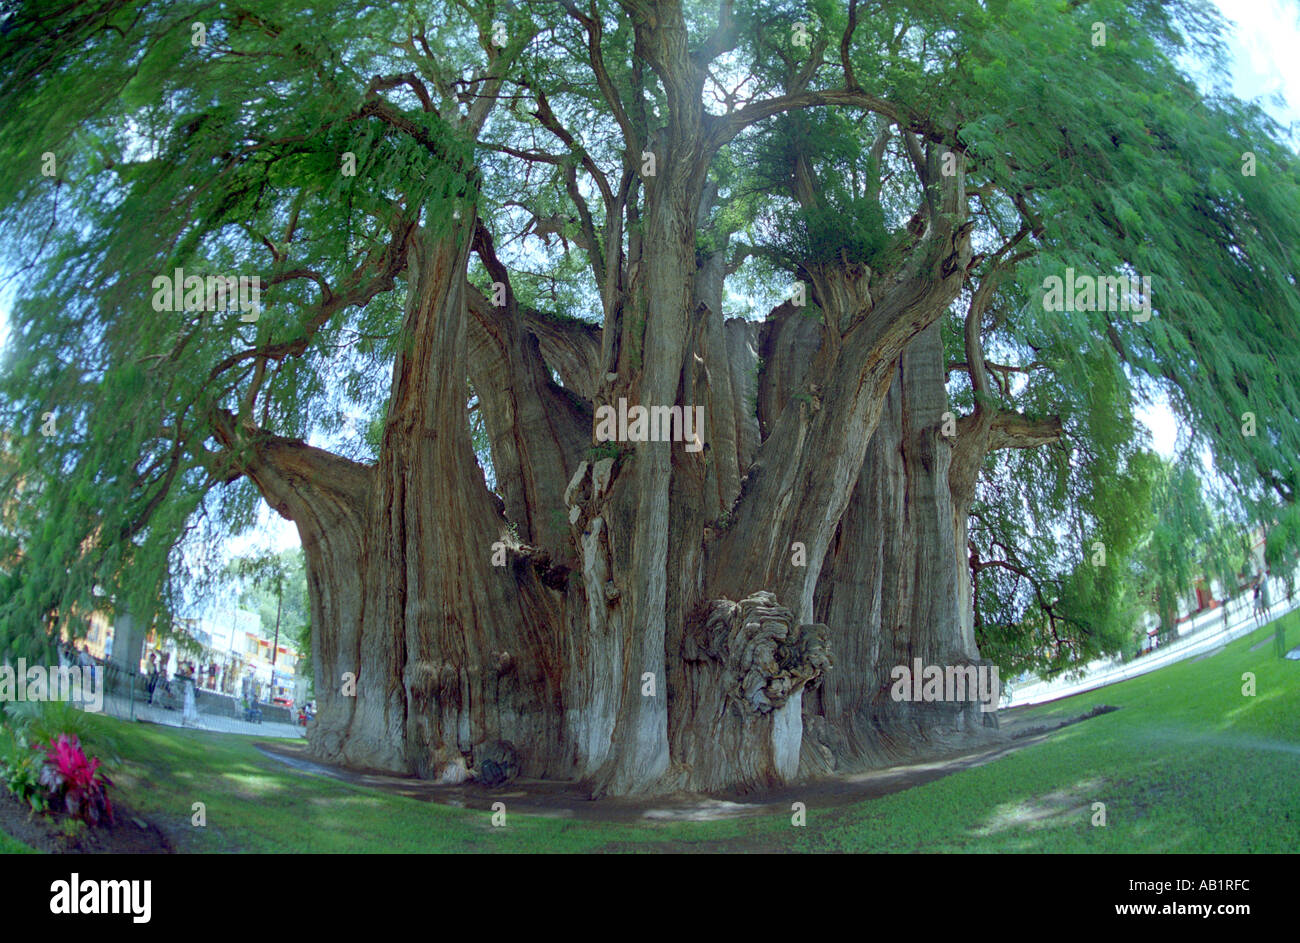 The giant Tule sabina or Ahuehuete tree at Santa María del Tule said to be the oldest tree in the world at 2000 years Oaxaca Stock Photo